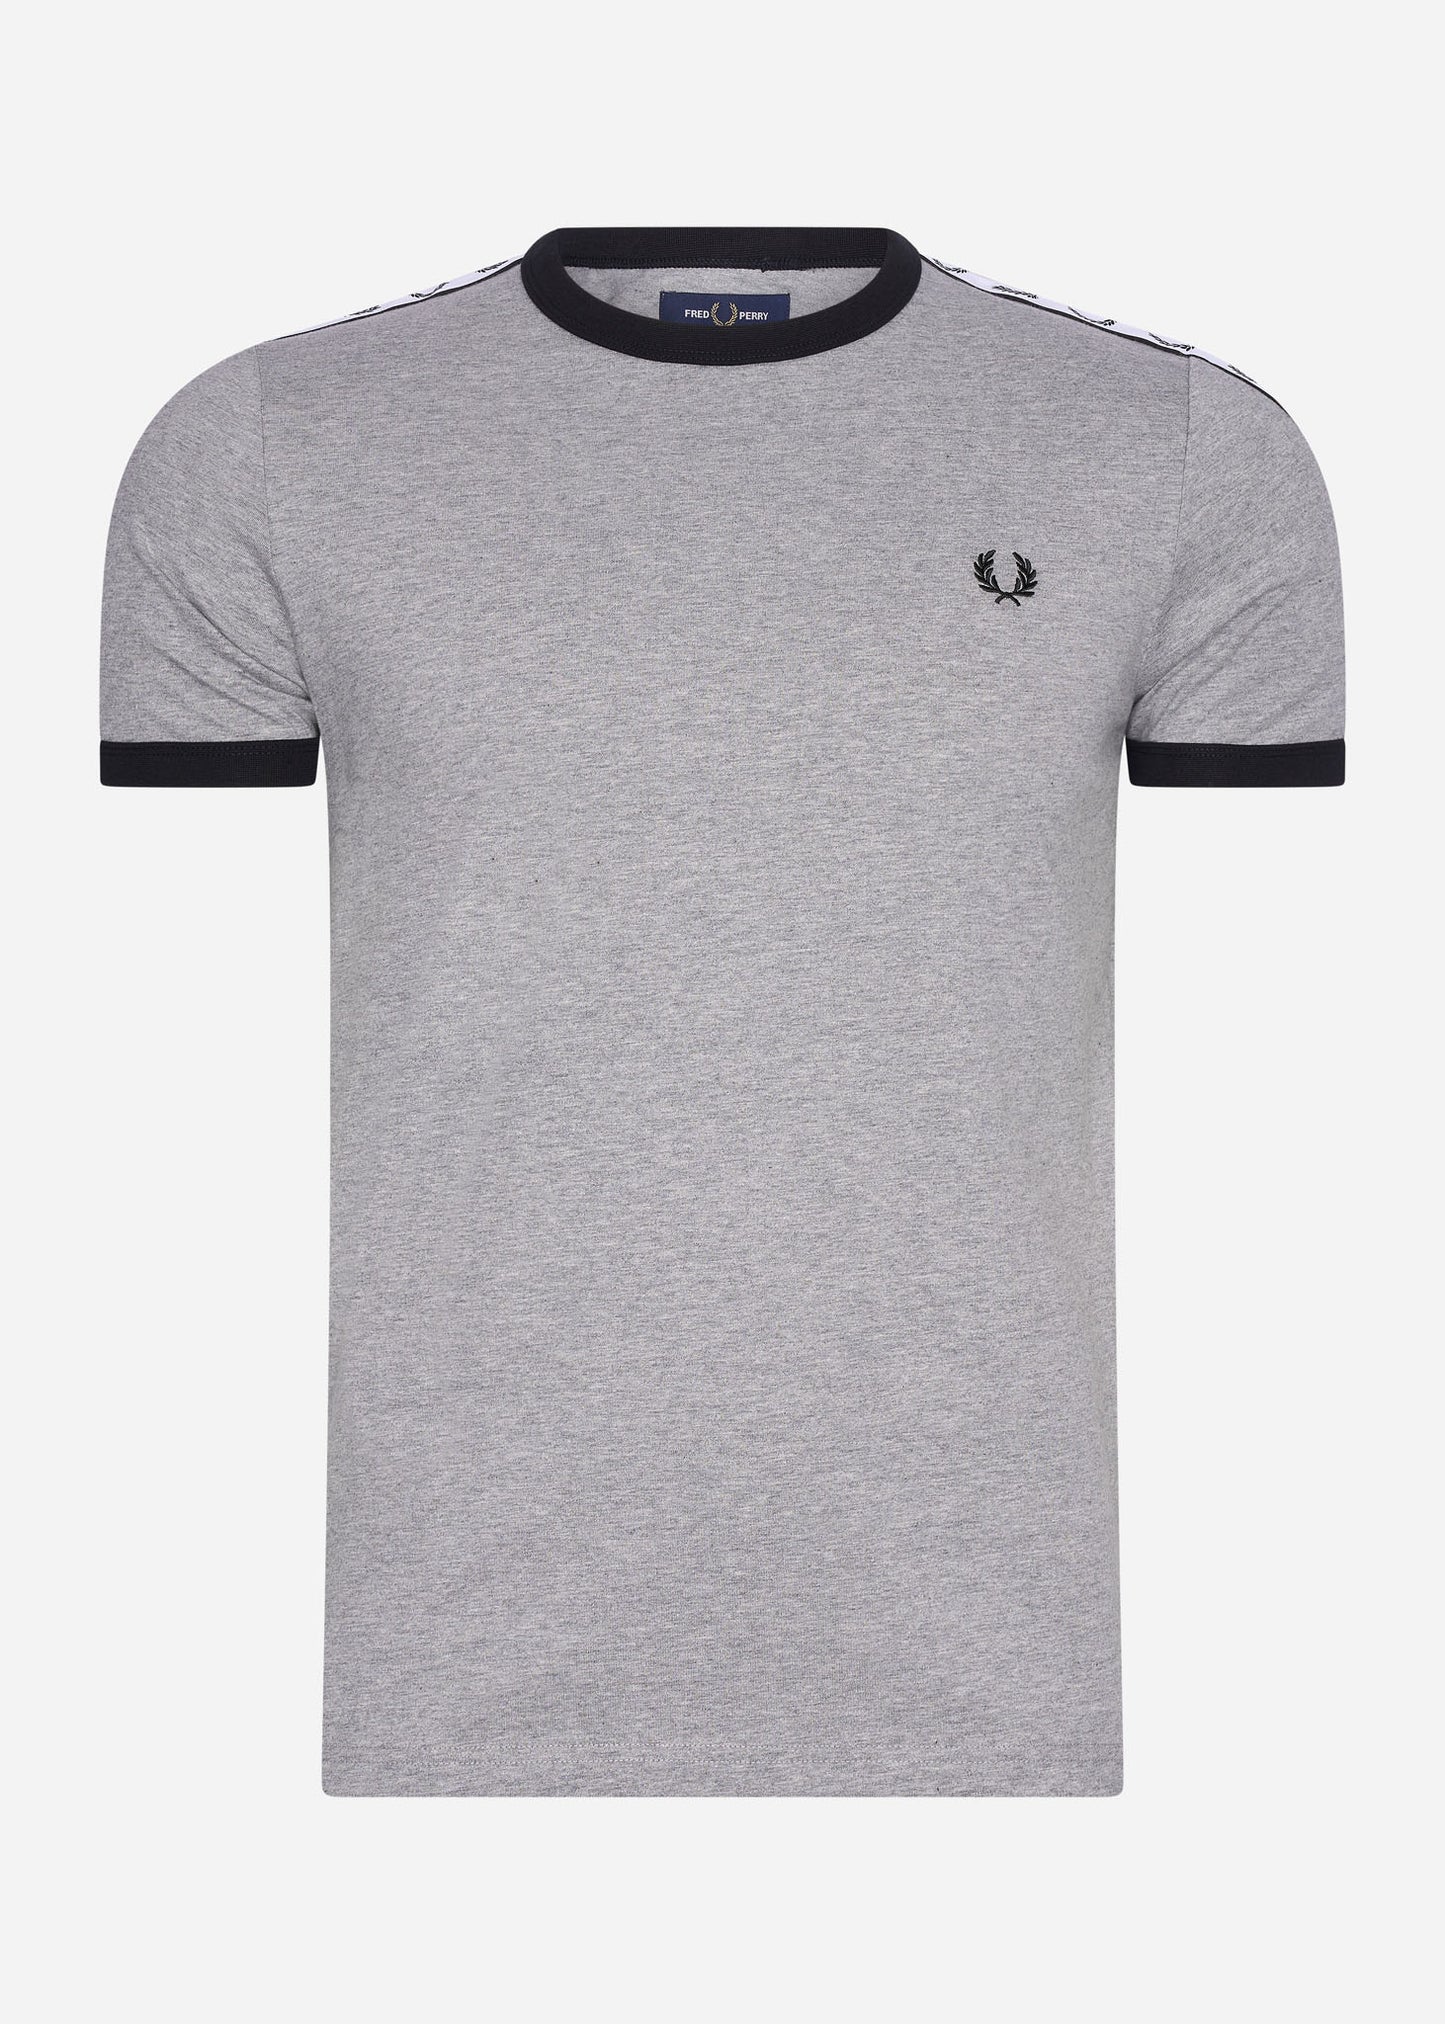 Fred Perry taped ringer t-shirt steel marl